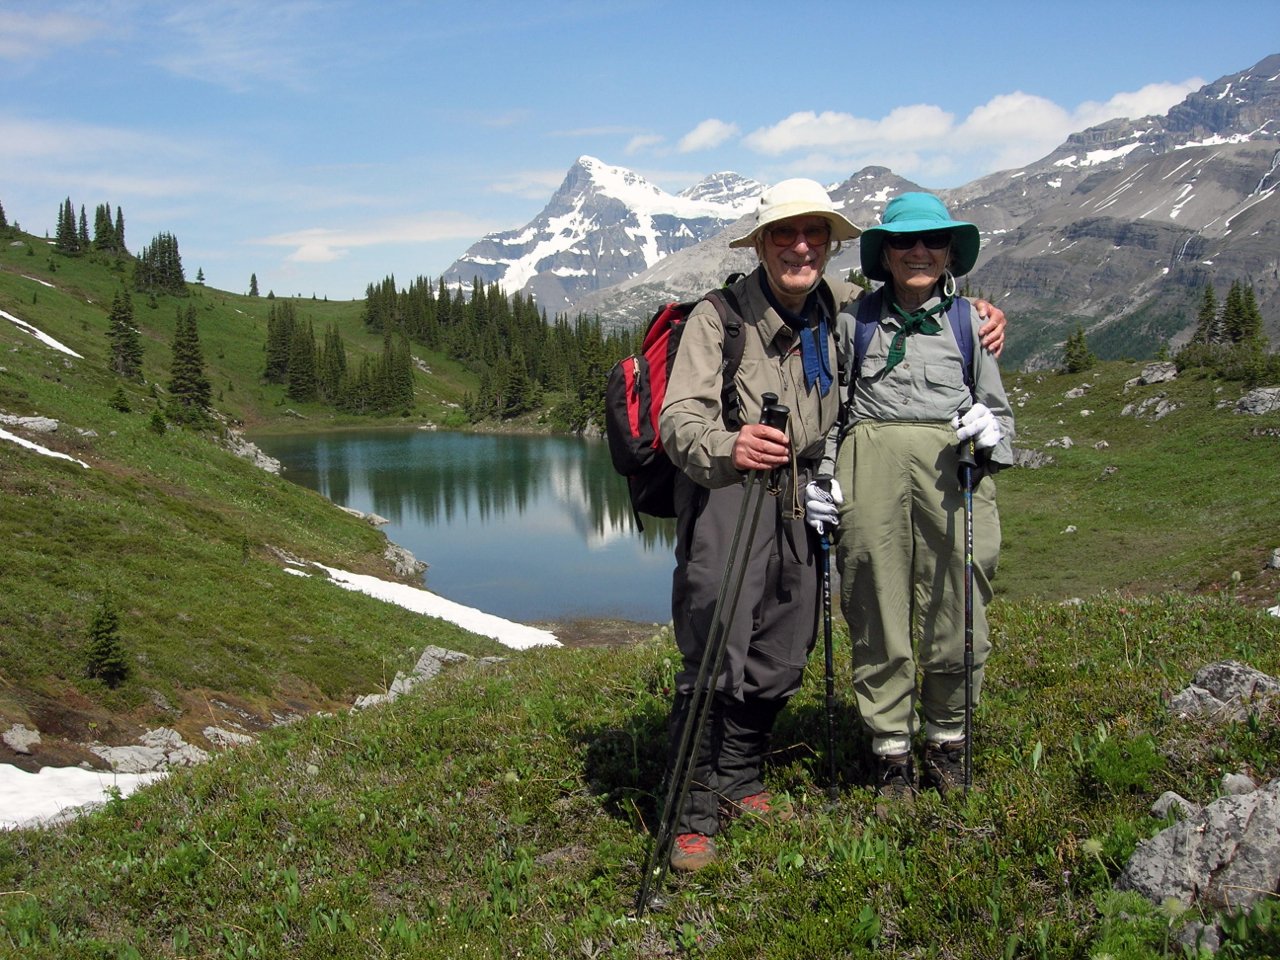  Richard and Louise soak in the high alpine wilderness at the ACC’s Mount Alexandra Camp, 2007. Photo courtesy of Richard Guy Collection. 